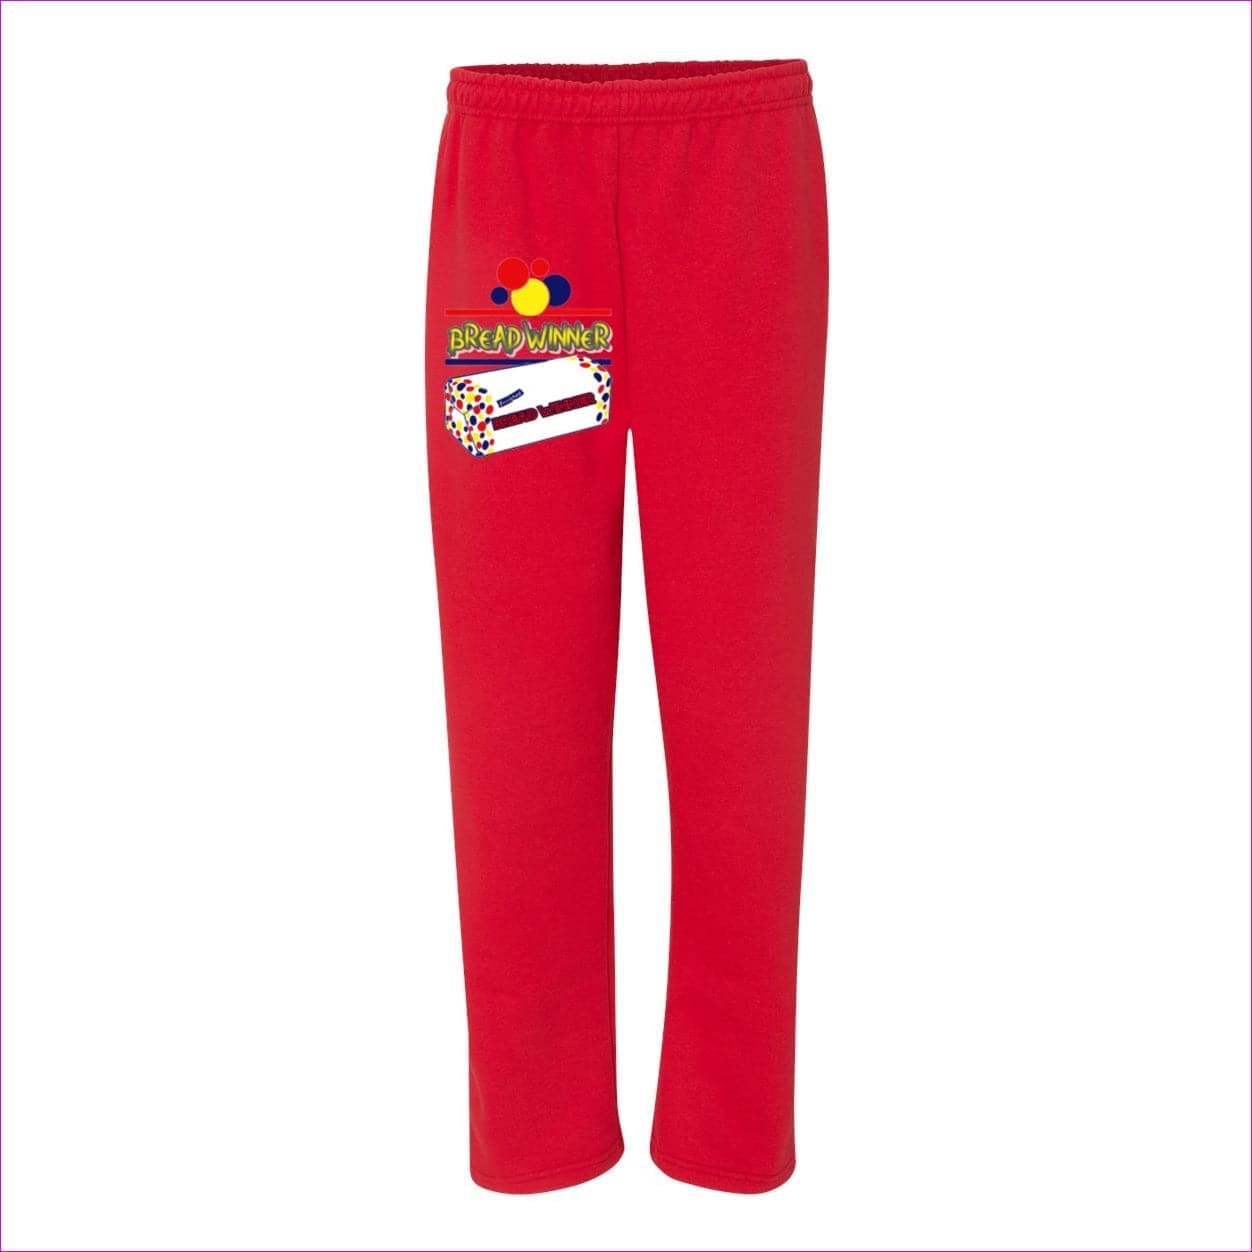 Red - Bread Winner Heavy Sweatpants with Pockets - mens sweatpants at TFC&H Co.